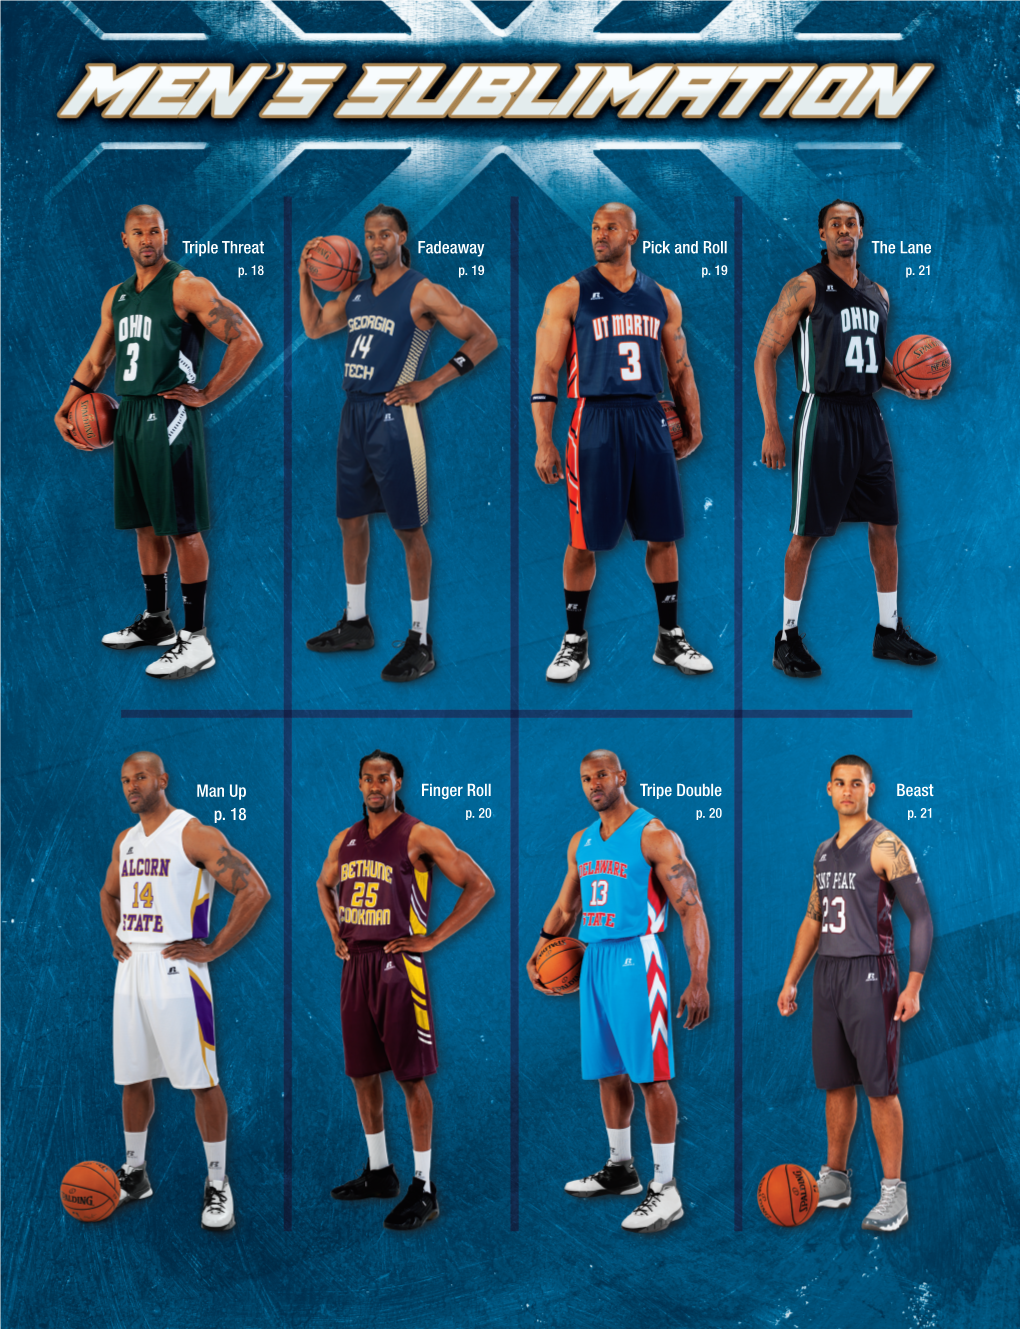 Russell Athletic Men's Sublimation Basketball Uniforms for Winter 2015